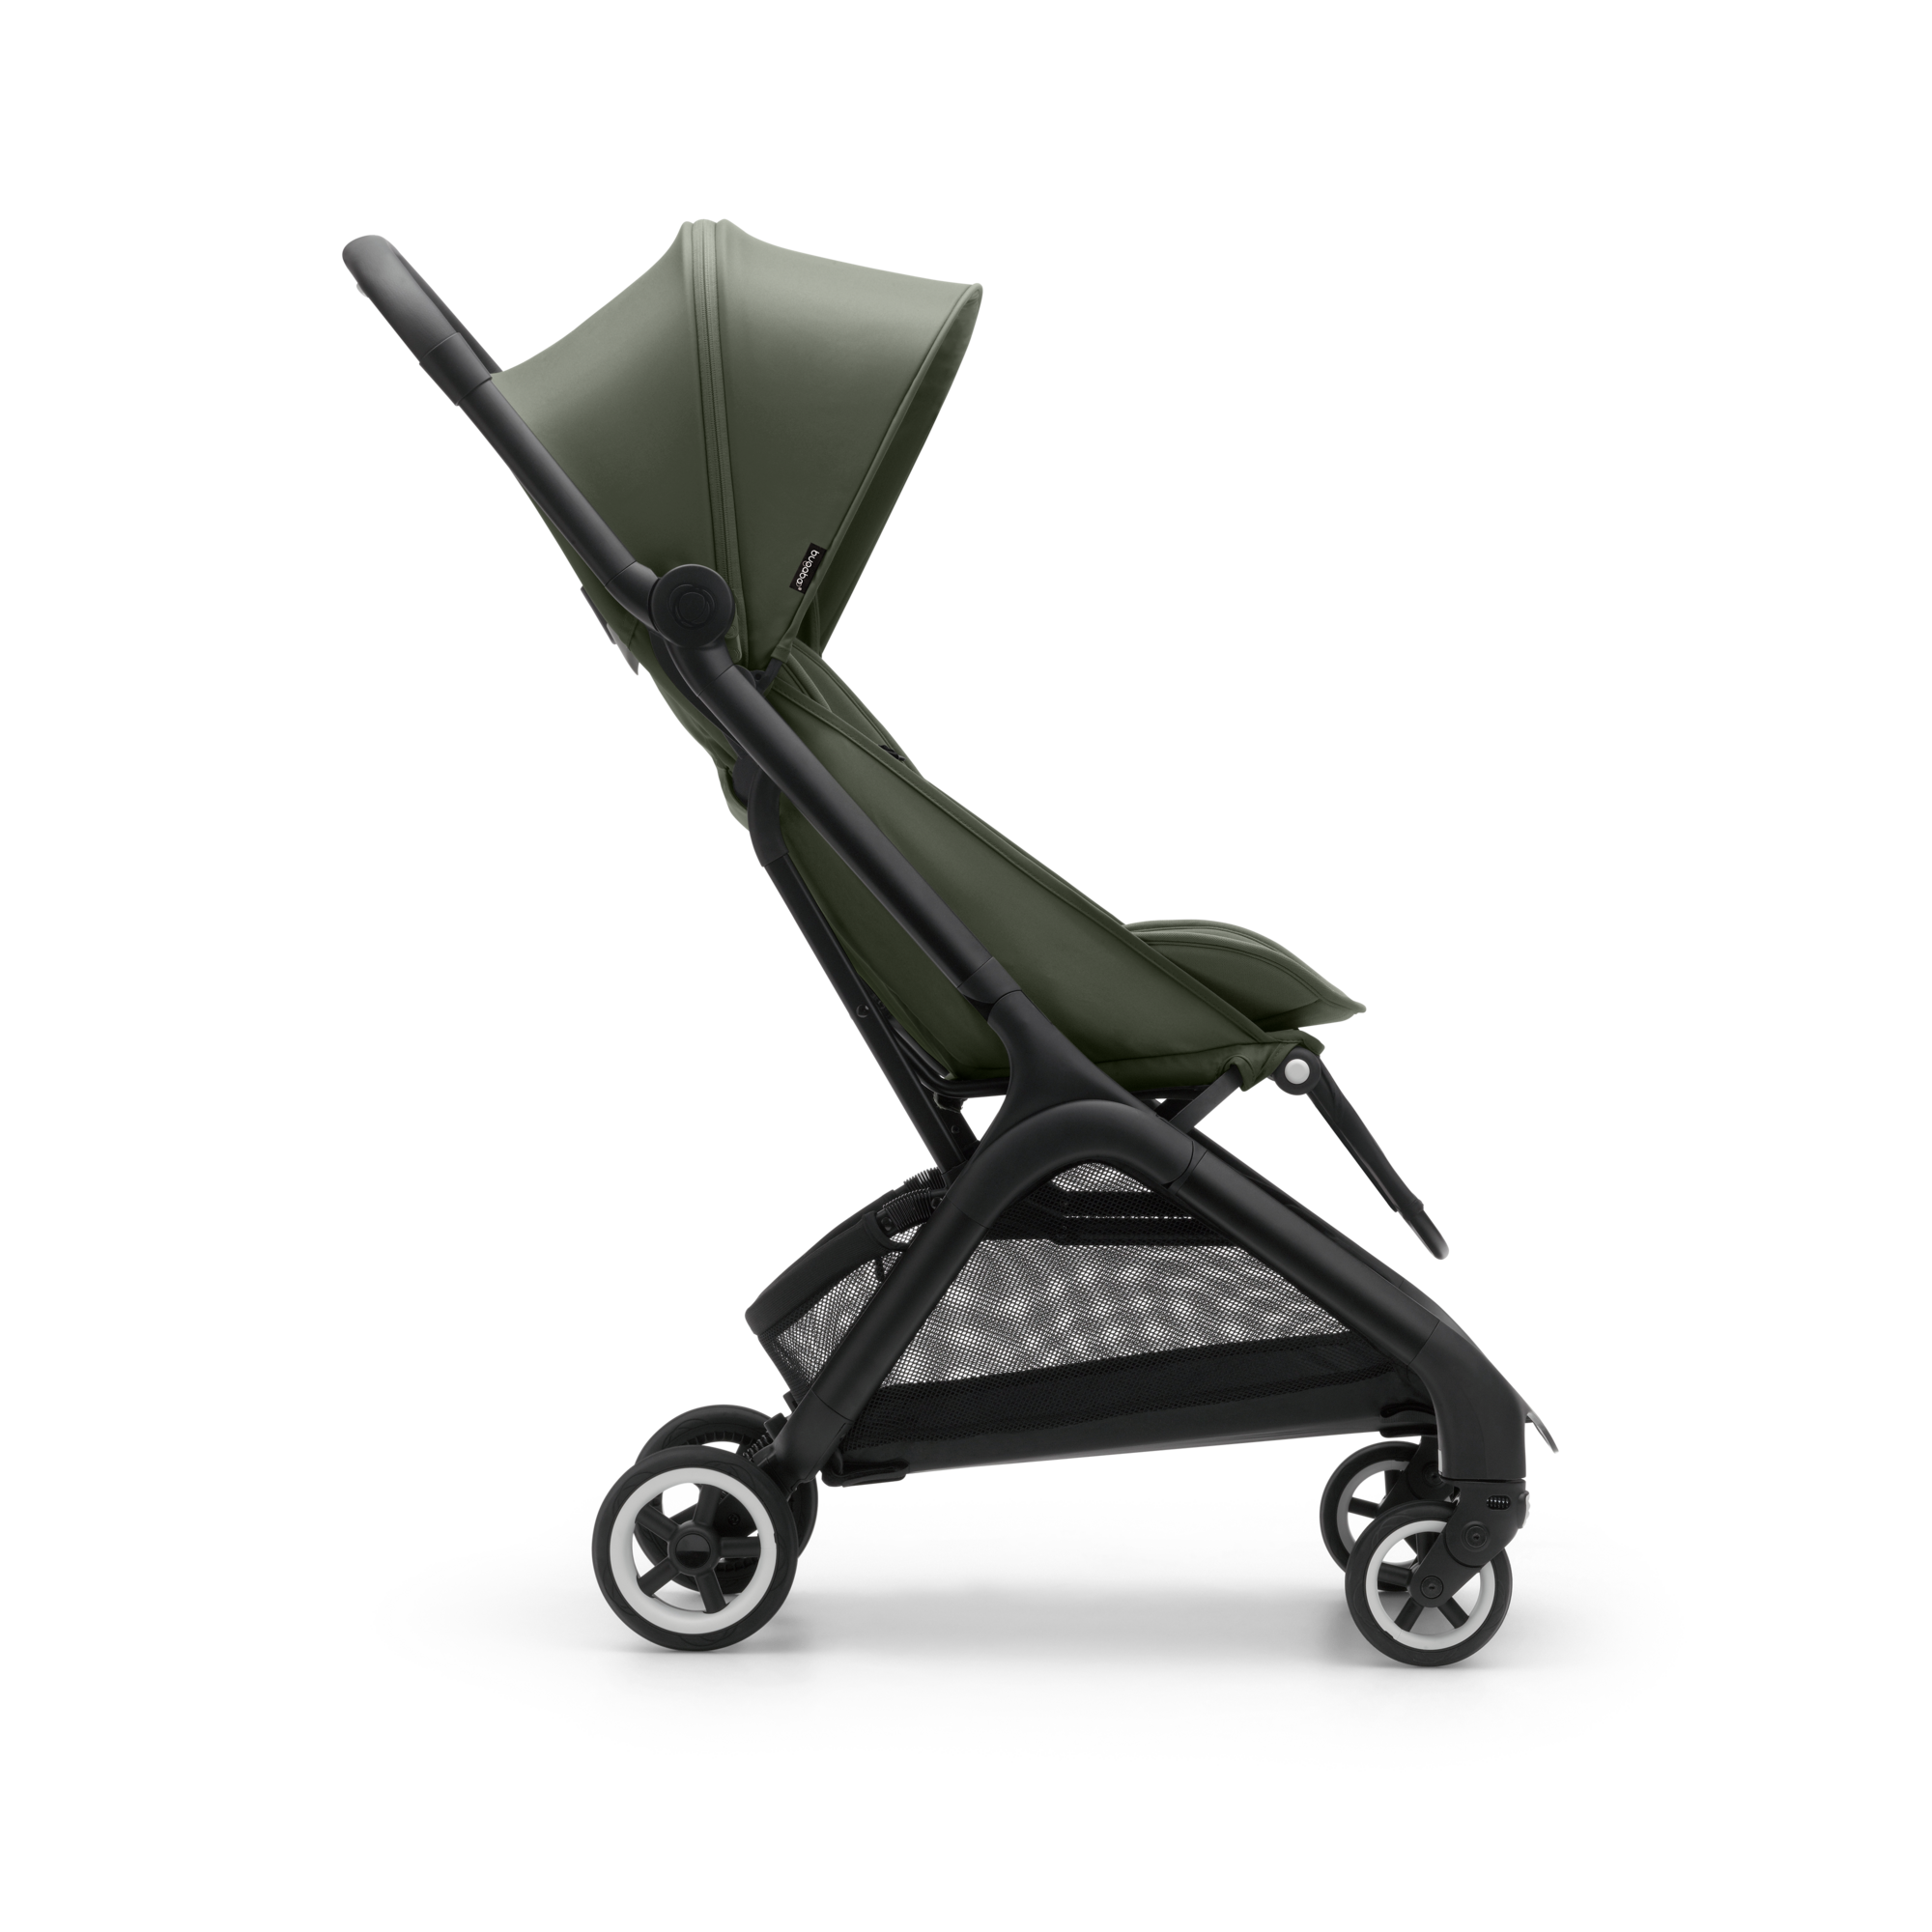 Bugaboo Butterfly seat pushchair Forest green sun canopy, forest green  fabrics, black chassis Bugaboo